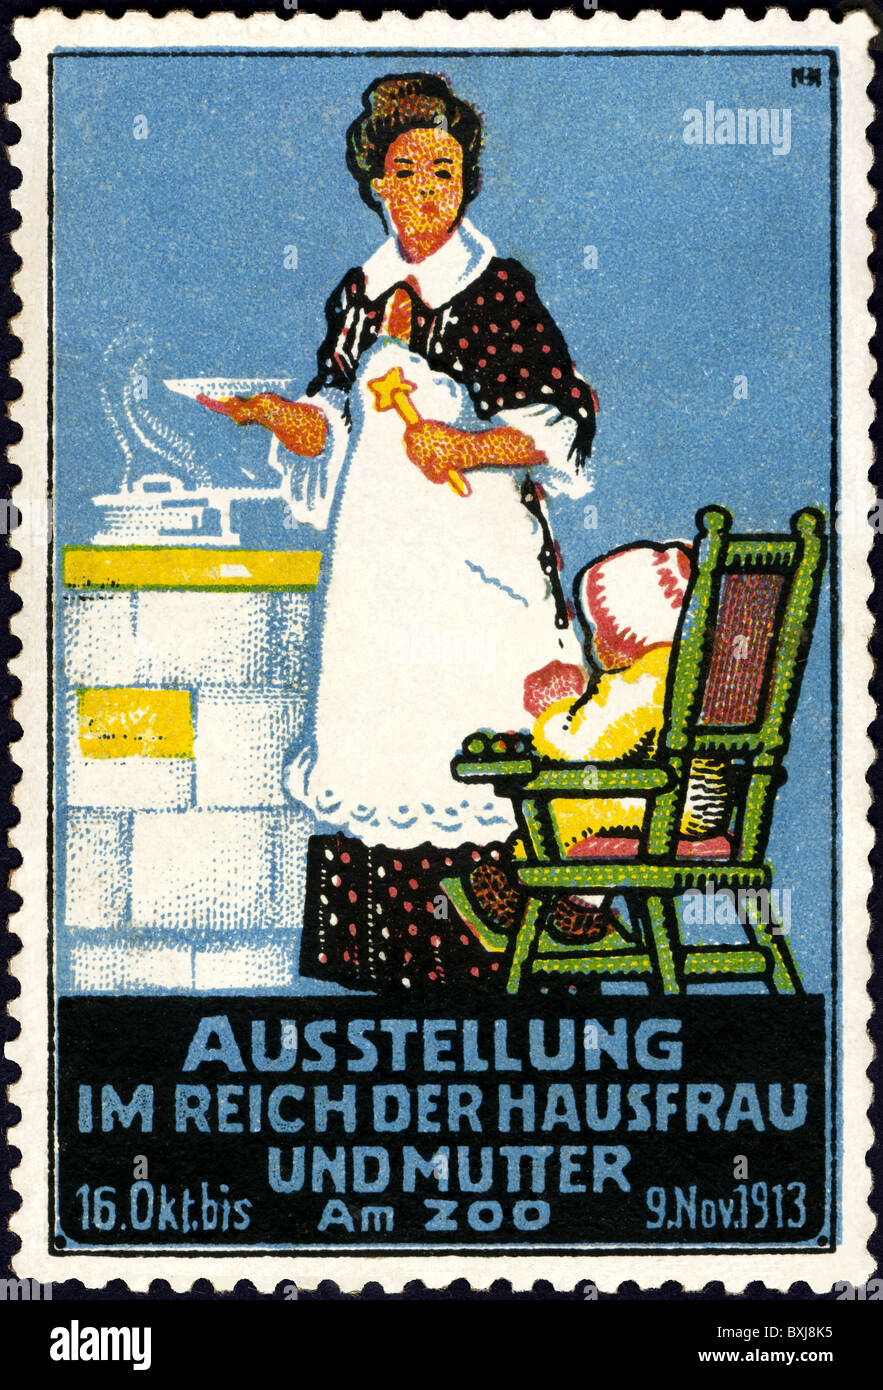 household, kitchen and kitchenware, mother is cooking for her child, Germany, advertising stamp, 1913, Additional-Rights-Clearences-Not Available Stock Photo